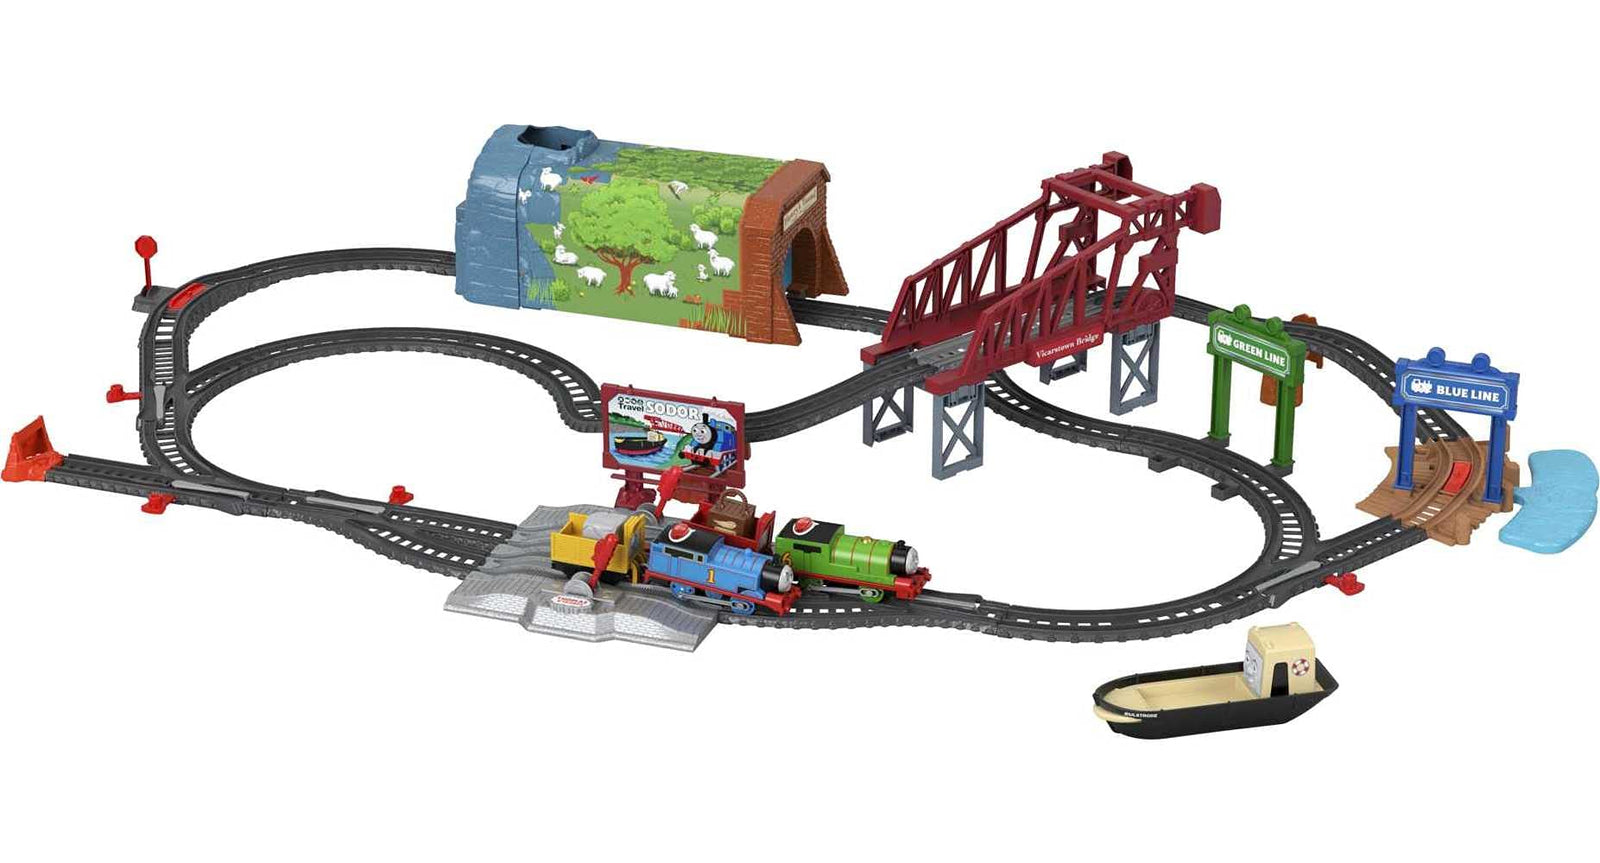 Thomas & Friends Talking Thomas & Percy Train Set, motorized train and track set for preschool kids ages 3 years and older